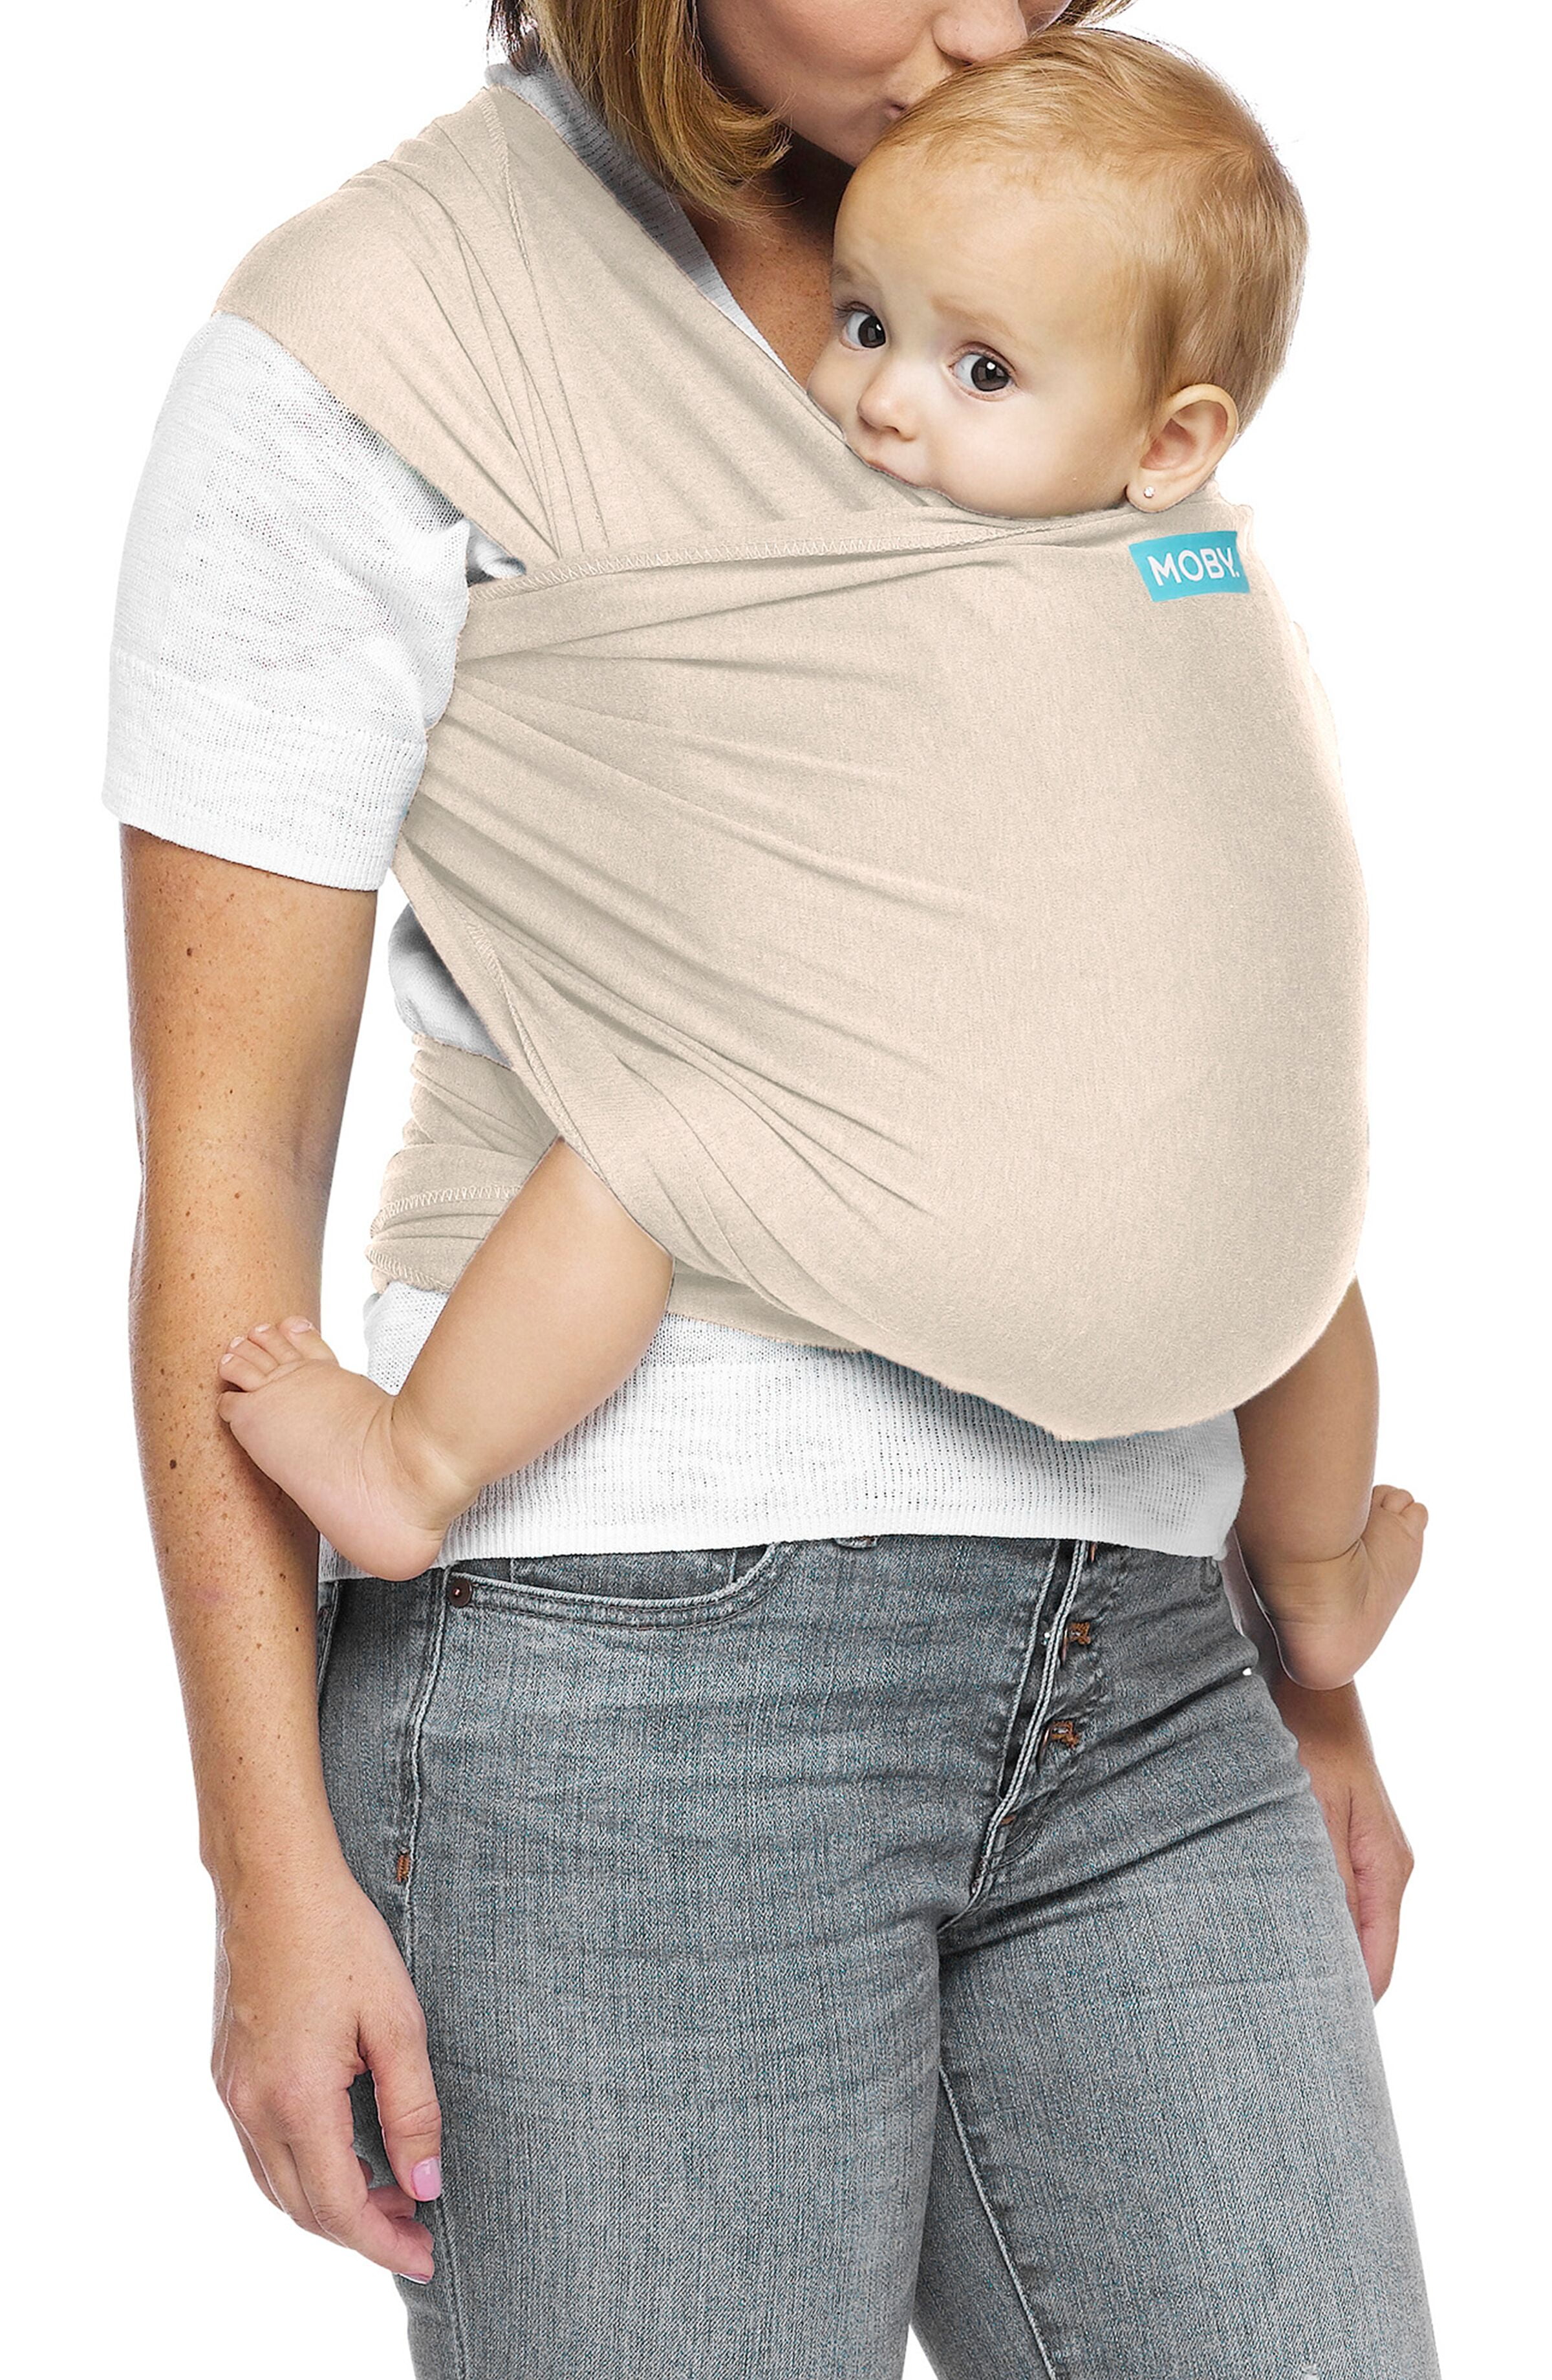 moby wrap weight